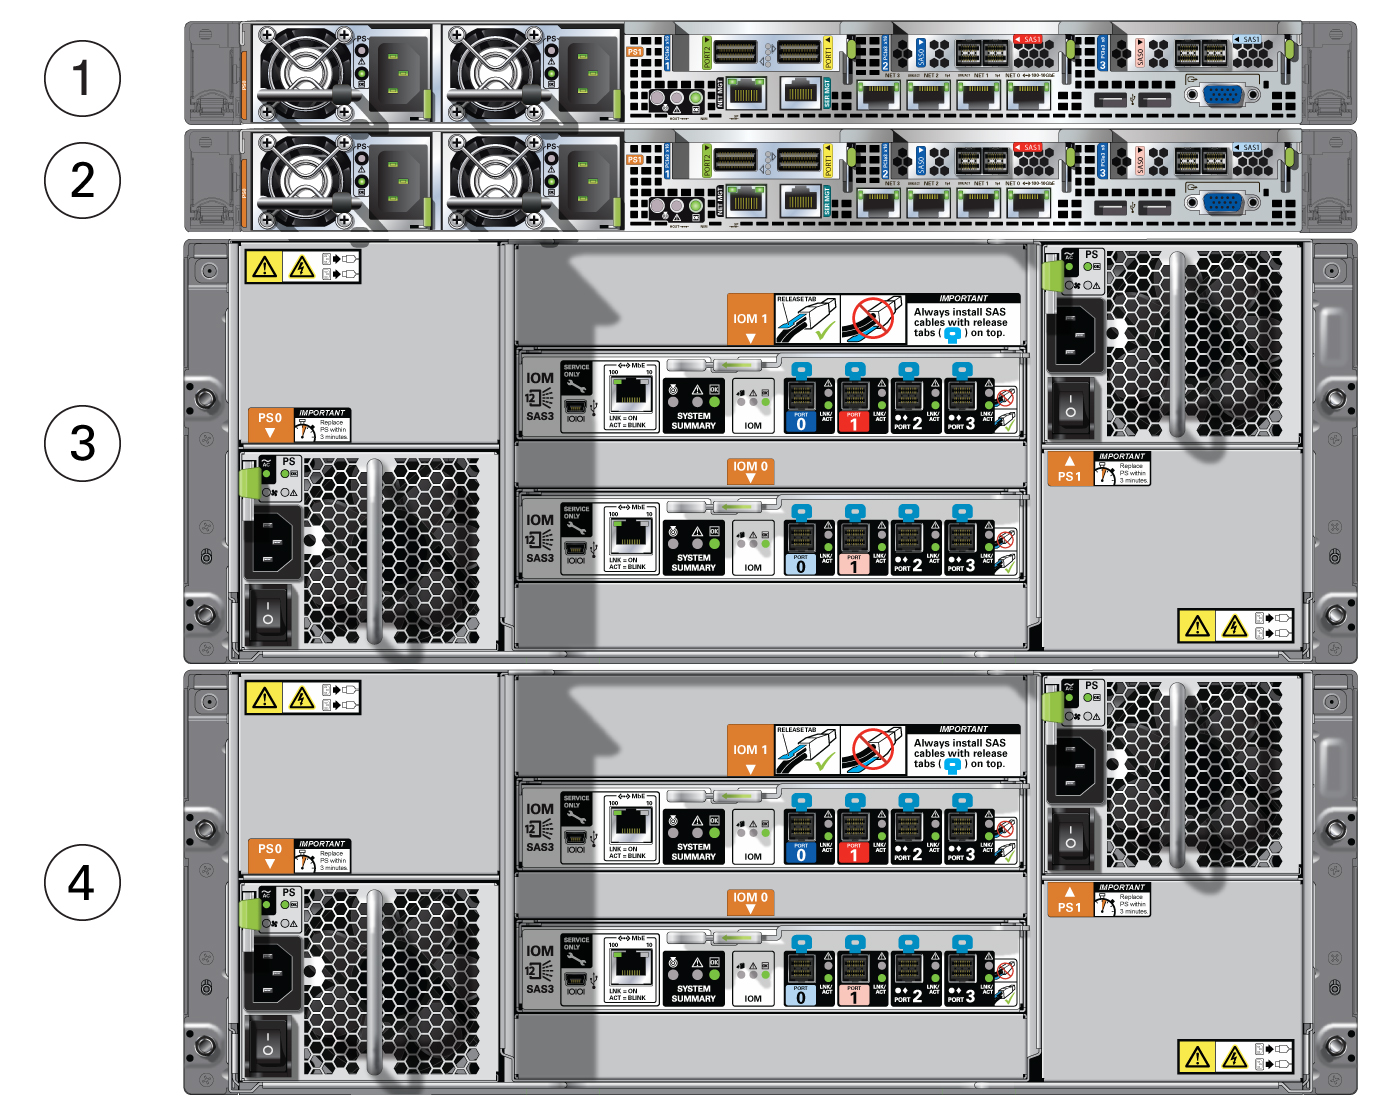 image:Picture showing rear view of Oracle Database Appliance X6-2-HA with callouts to main components.